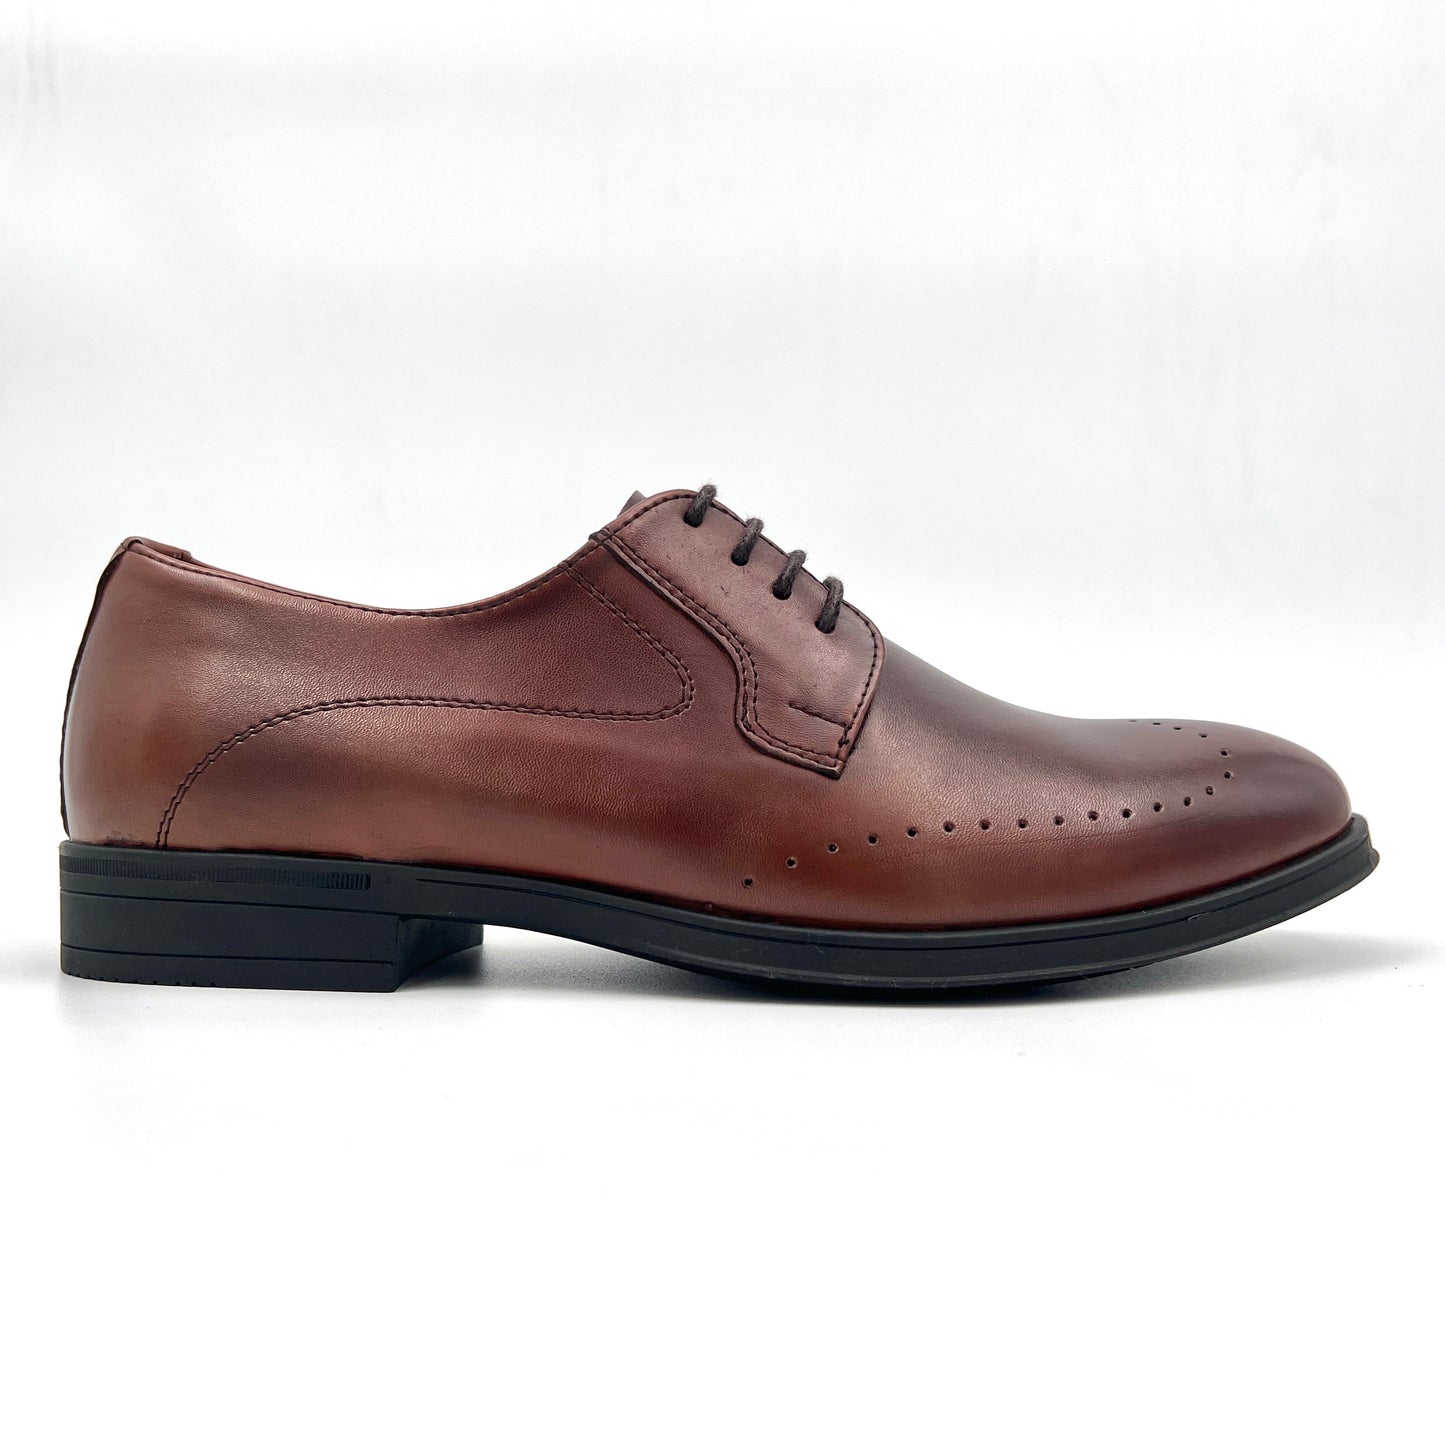 2H #969 Classic Brown Shoes